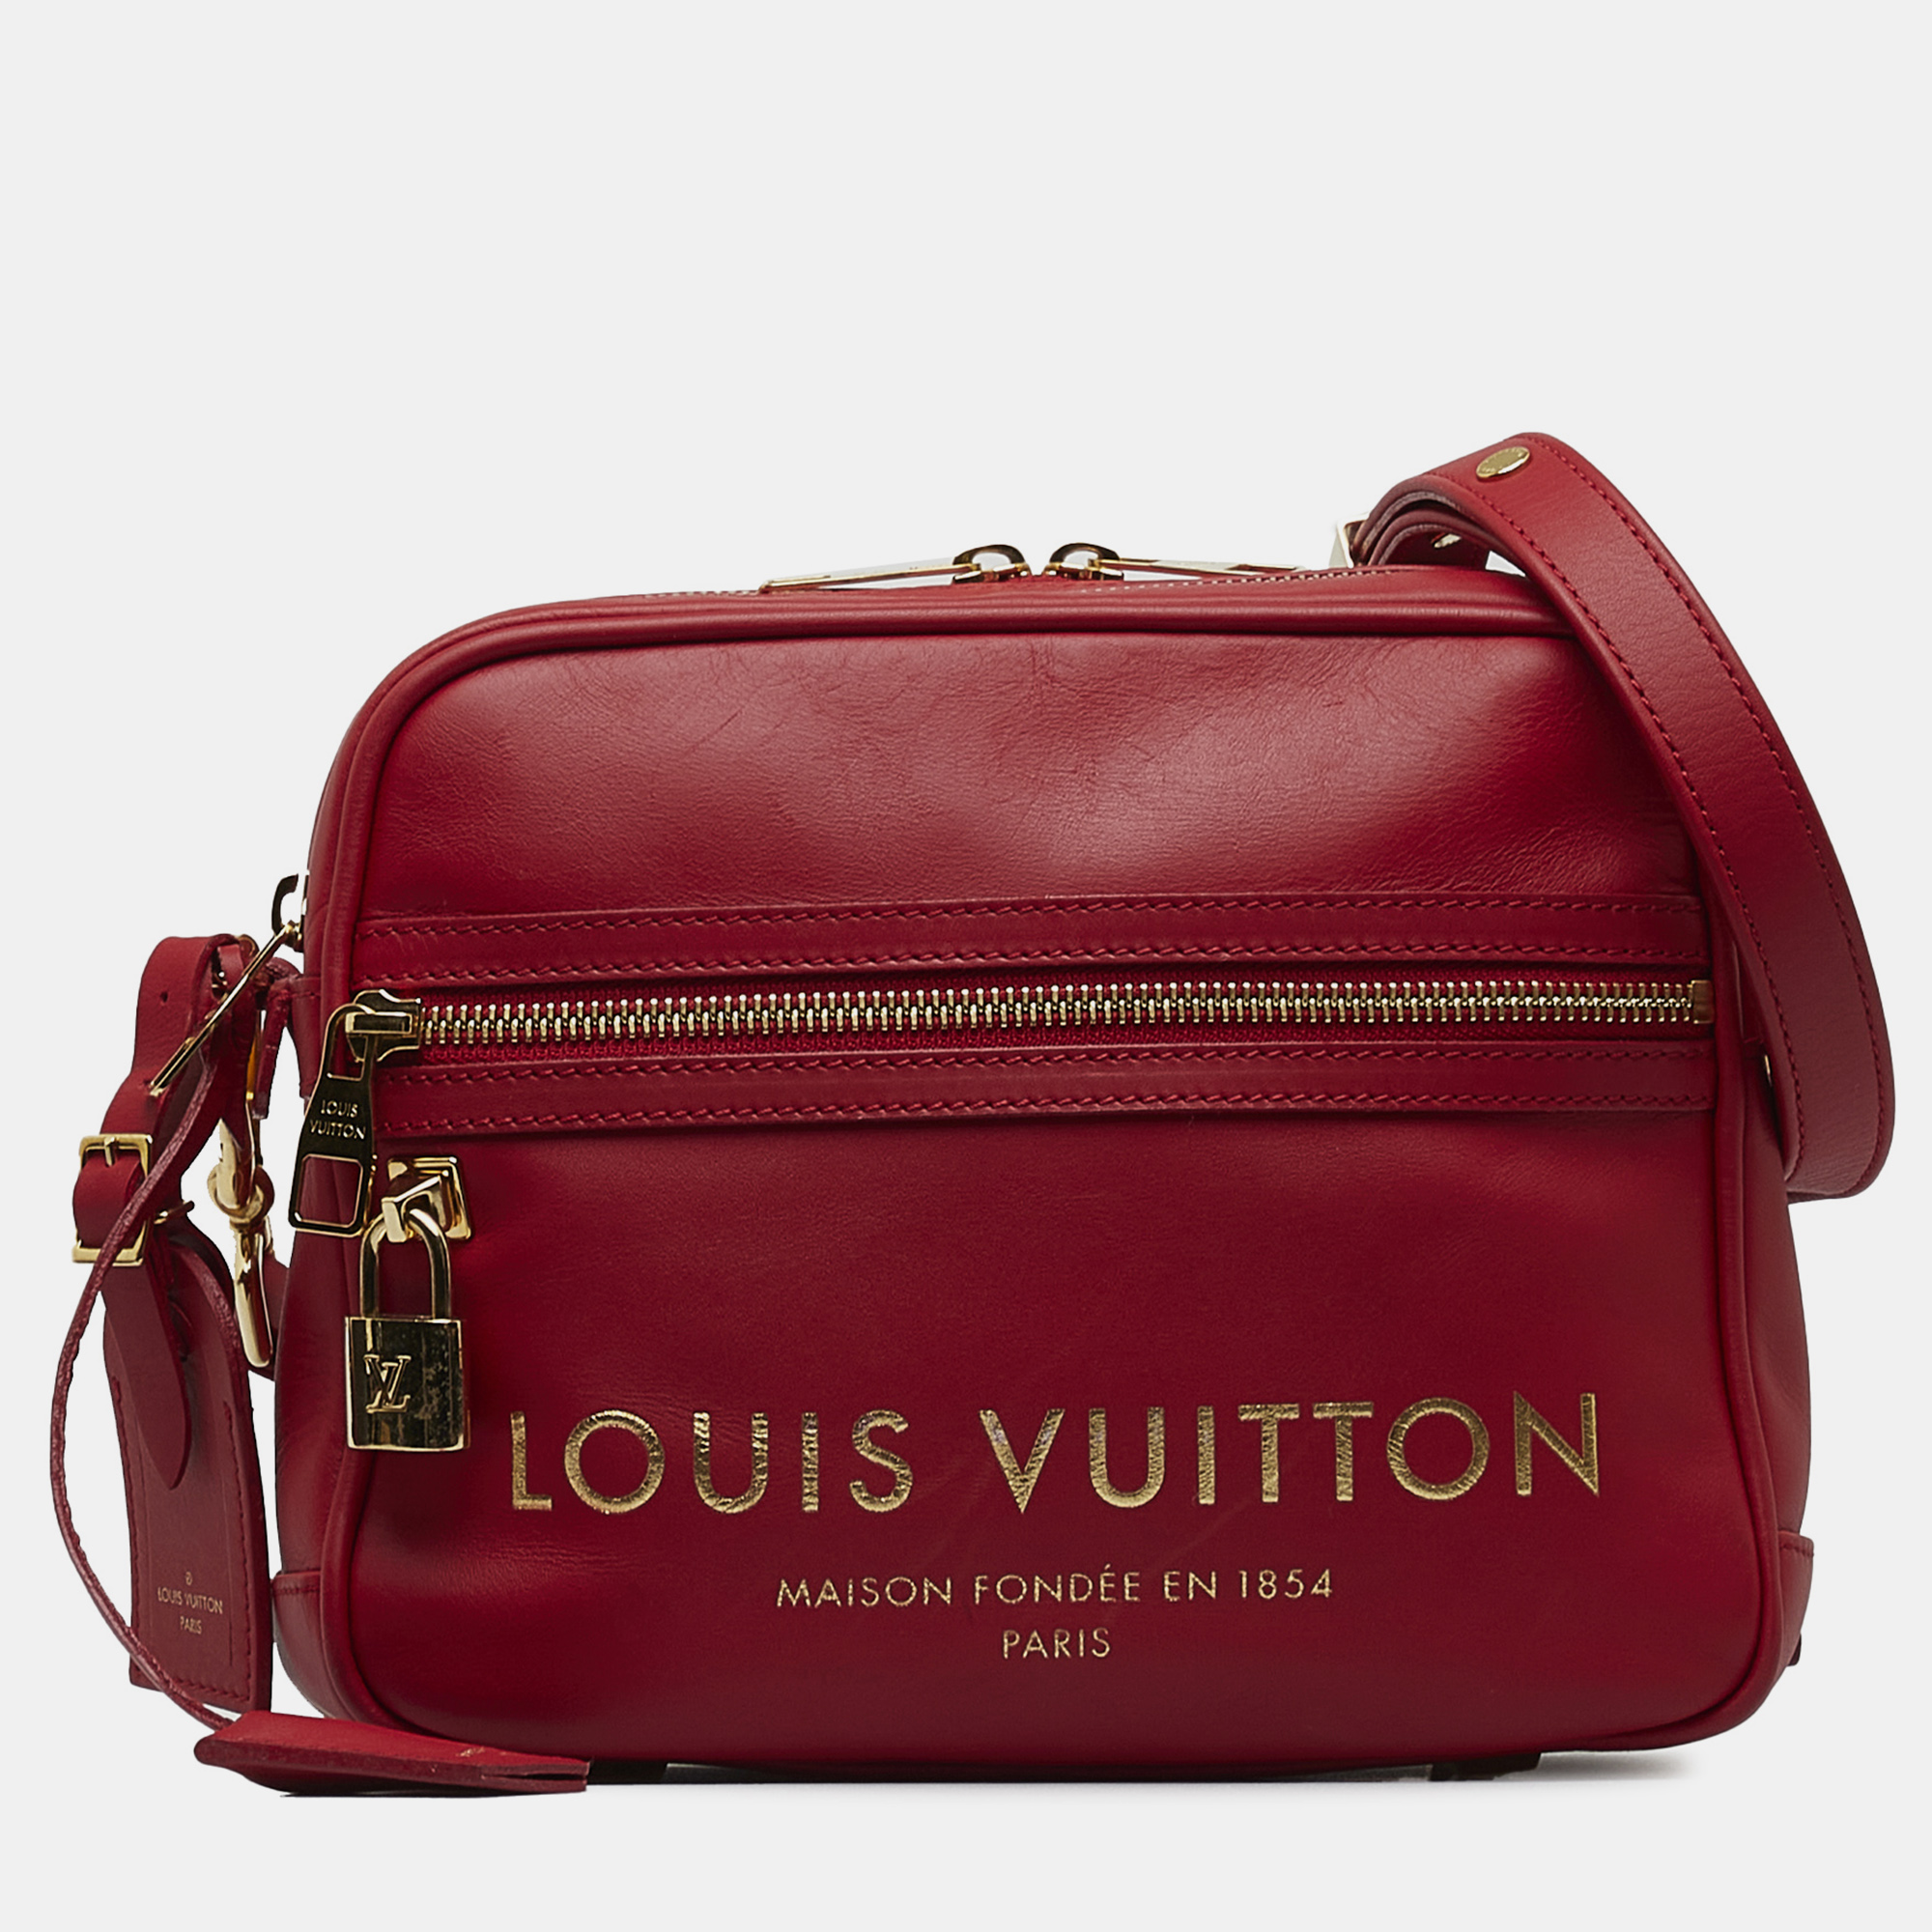 Louis Vuitton Red Leather Flight Paname Takeoff Bag